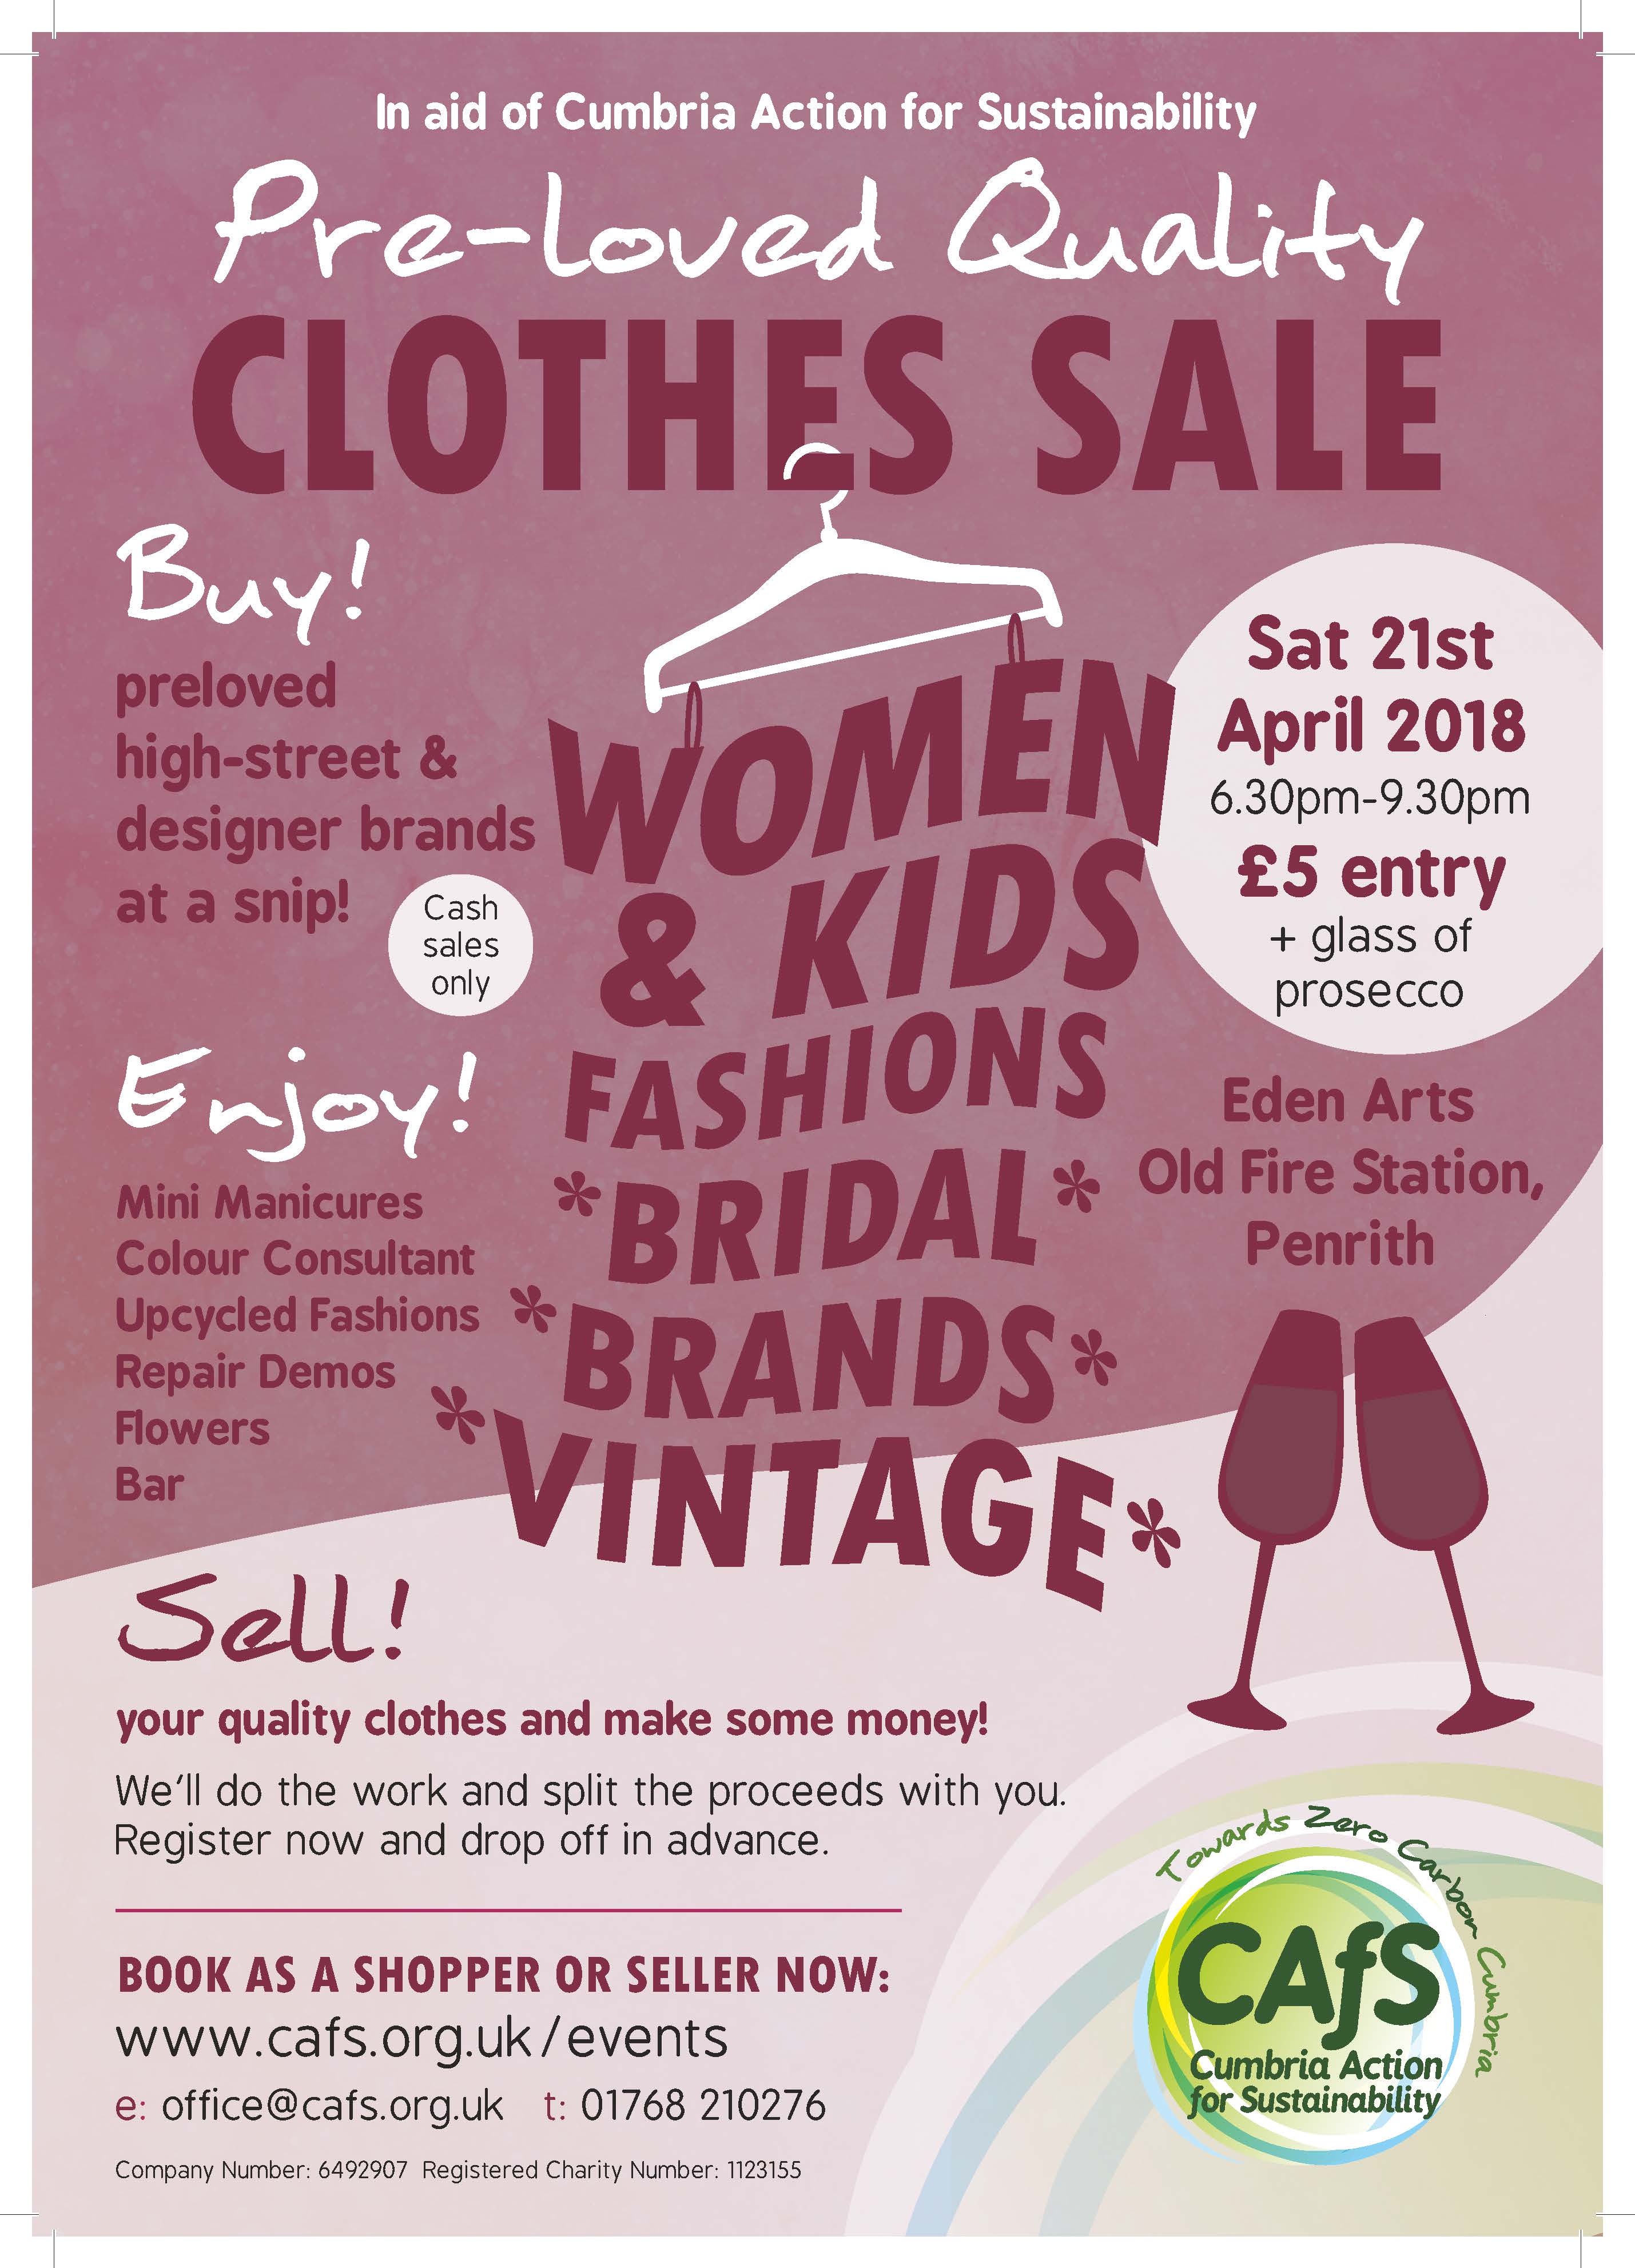 Compass - Event: PreLoved Quality Clothes Sale Fundraiser